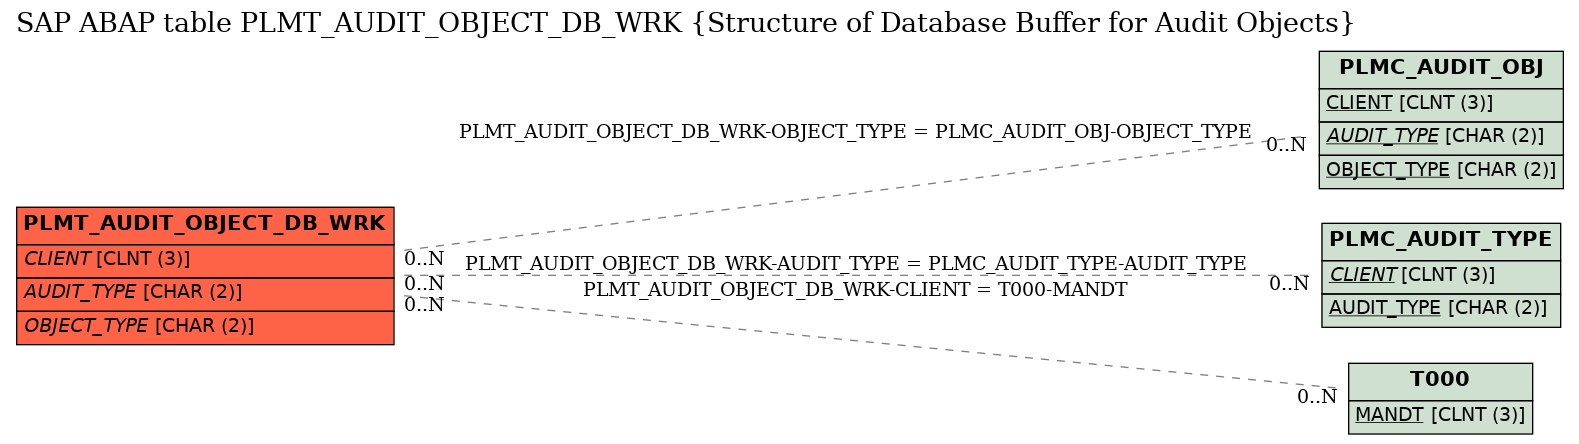 E-R Diagram for table PLMT_AUDIT_OBJECT_DB_WRK (Structure of Database Buffer for Audit Objects)